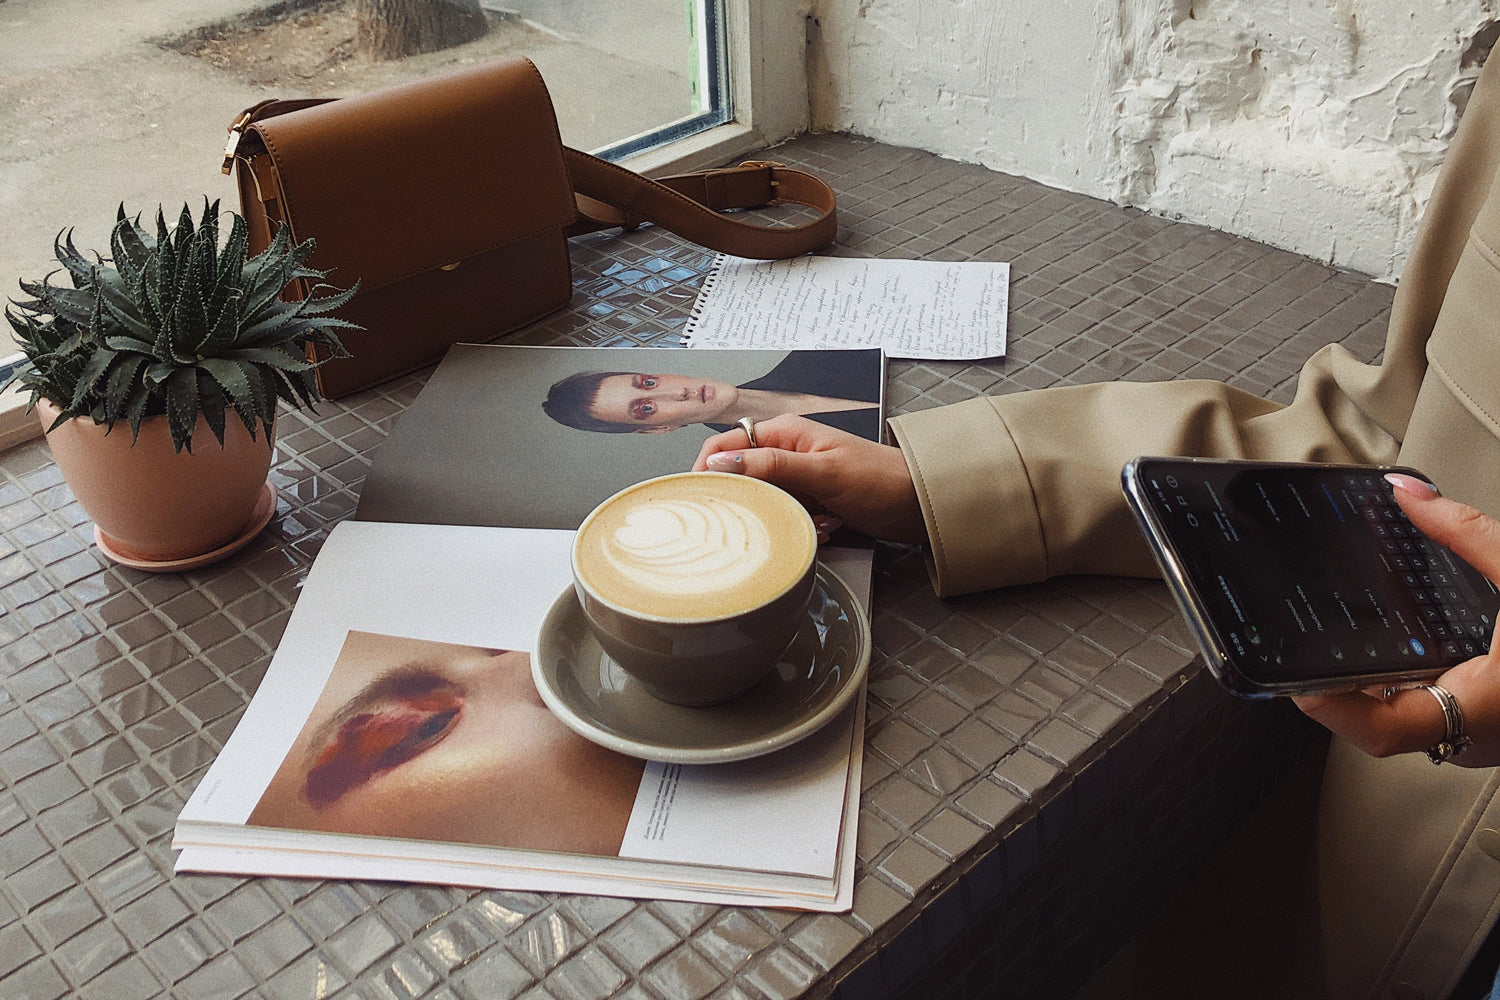 A latte in a mug sits on a magazine on a table with a plant and a handbag in front of a window